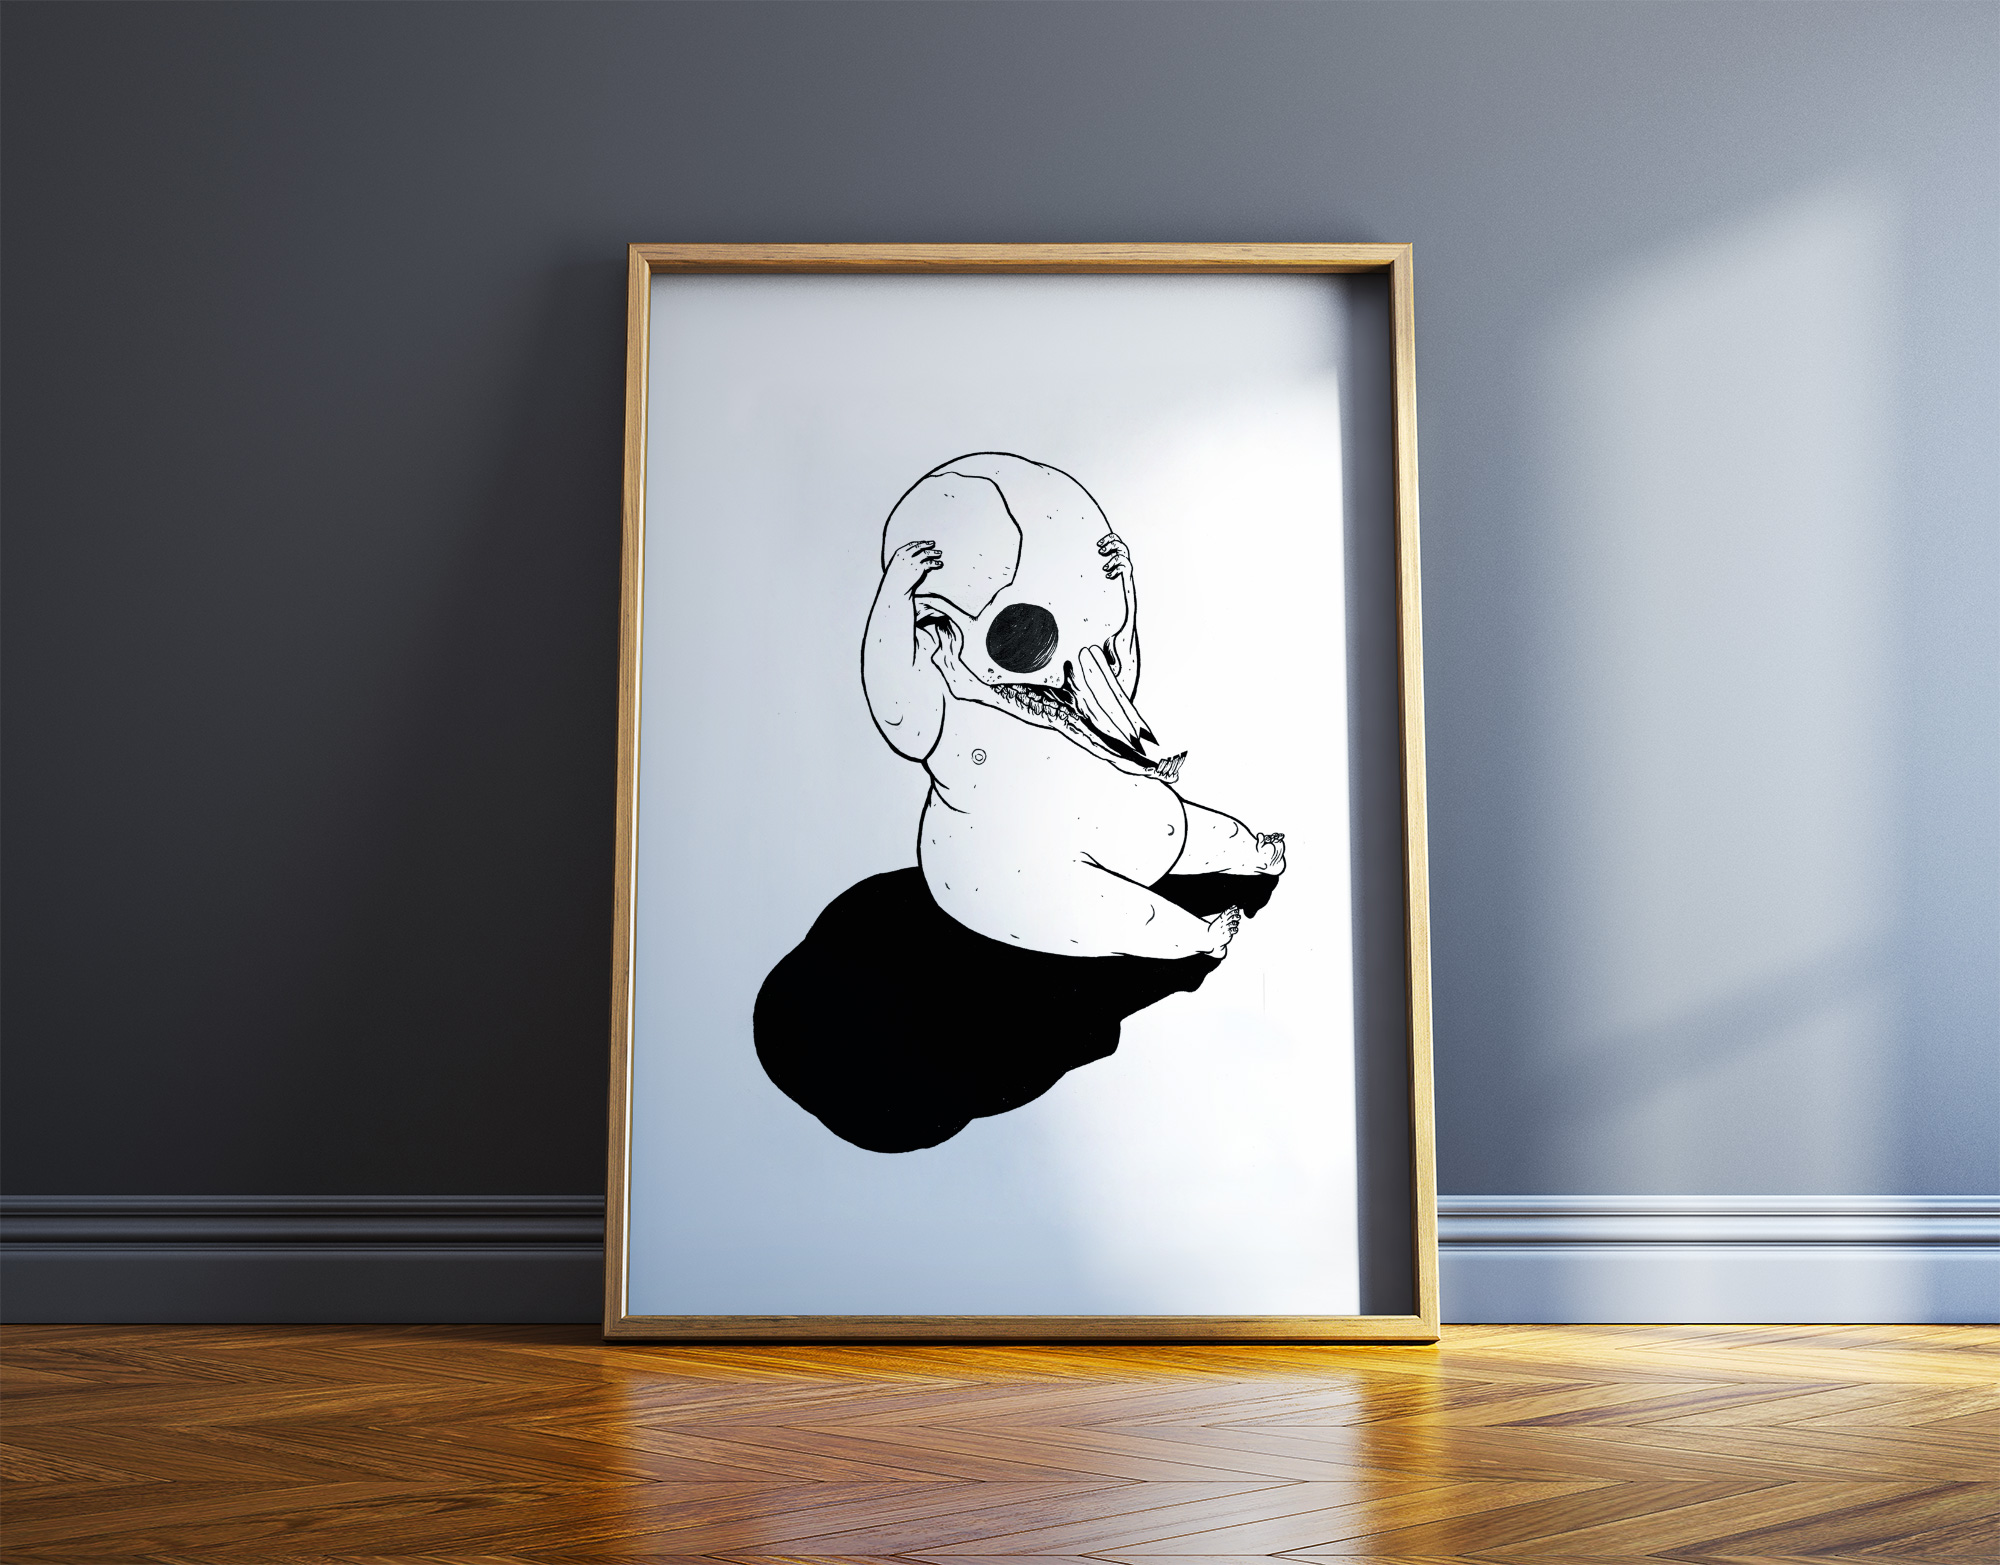 posters-prints, giclee-print, illustrative, monochrome, bodies, cartoons, children, humor, people, black, white, ink, paper, amusing, black-and-white, contemporary-art, danish, decorative, design, faces, modern, modern-art, nordic, scandinavien, sketch, Buy original high quality art. Paintings, drawings, limited edition prints & posters by talented artists.